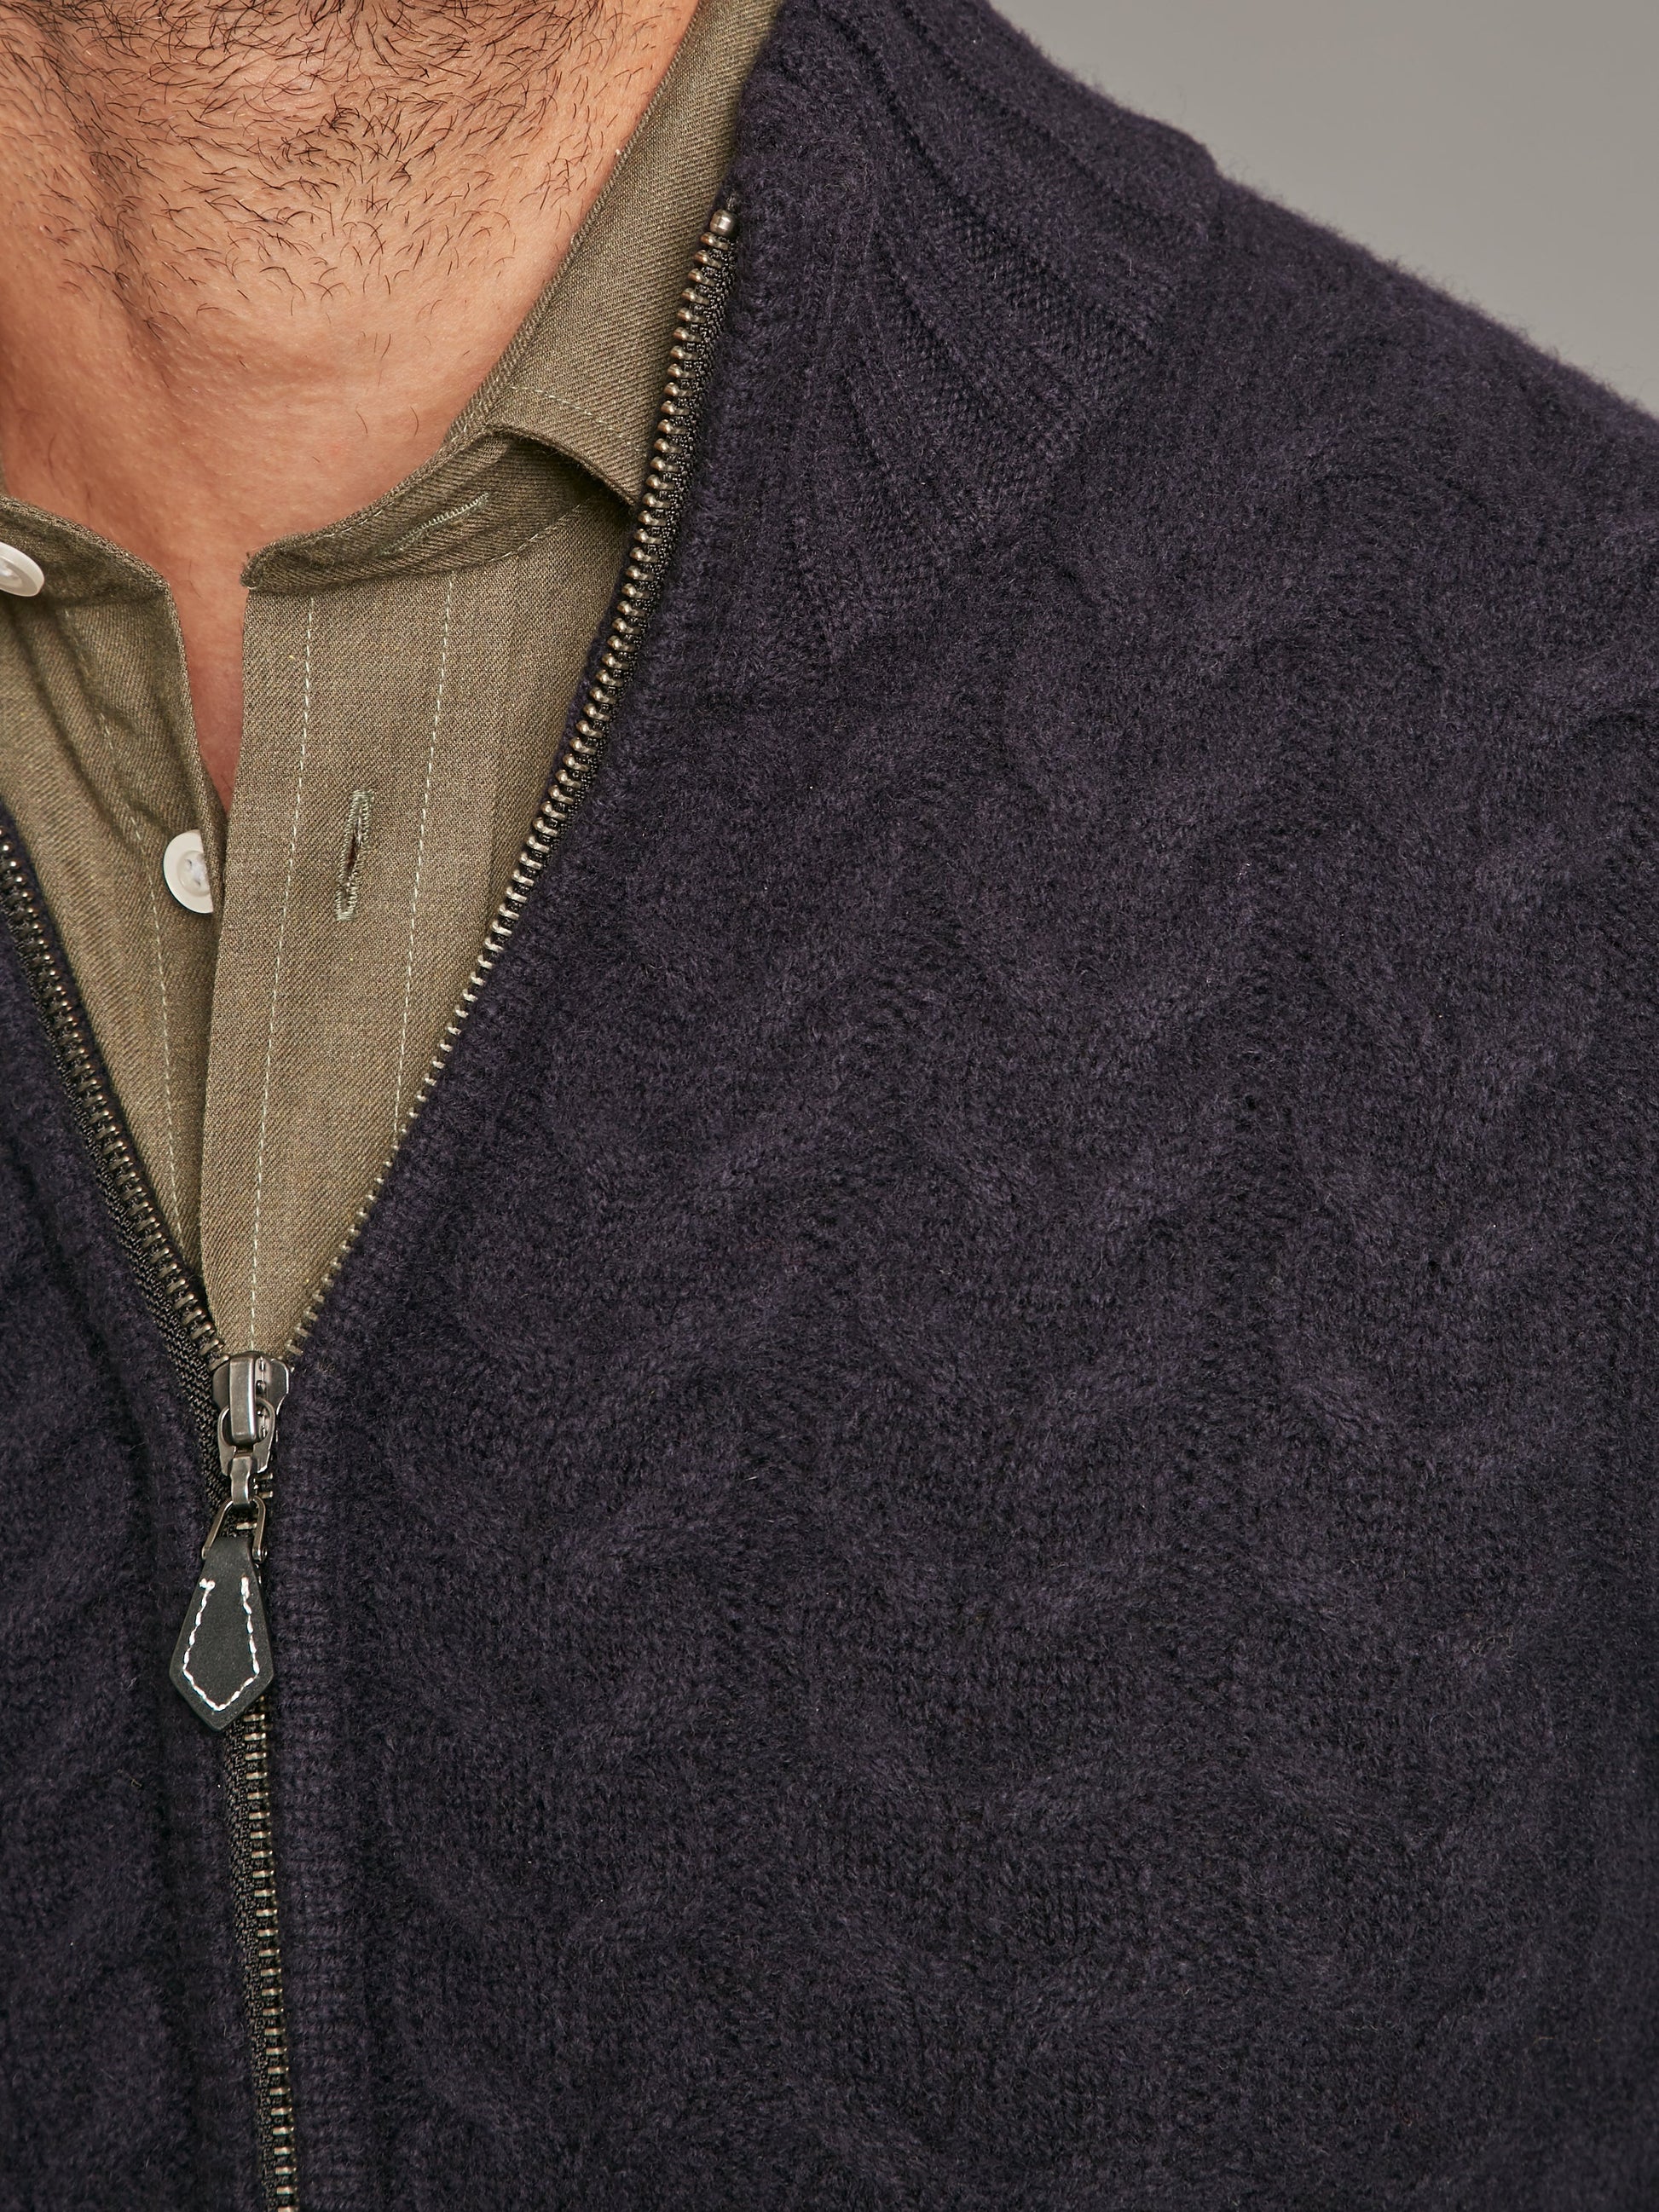 lambswool cable knit zip cardigan navy 2